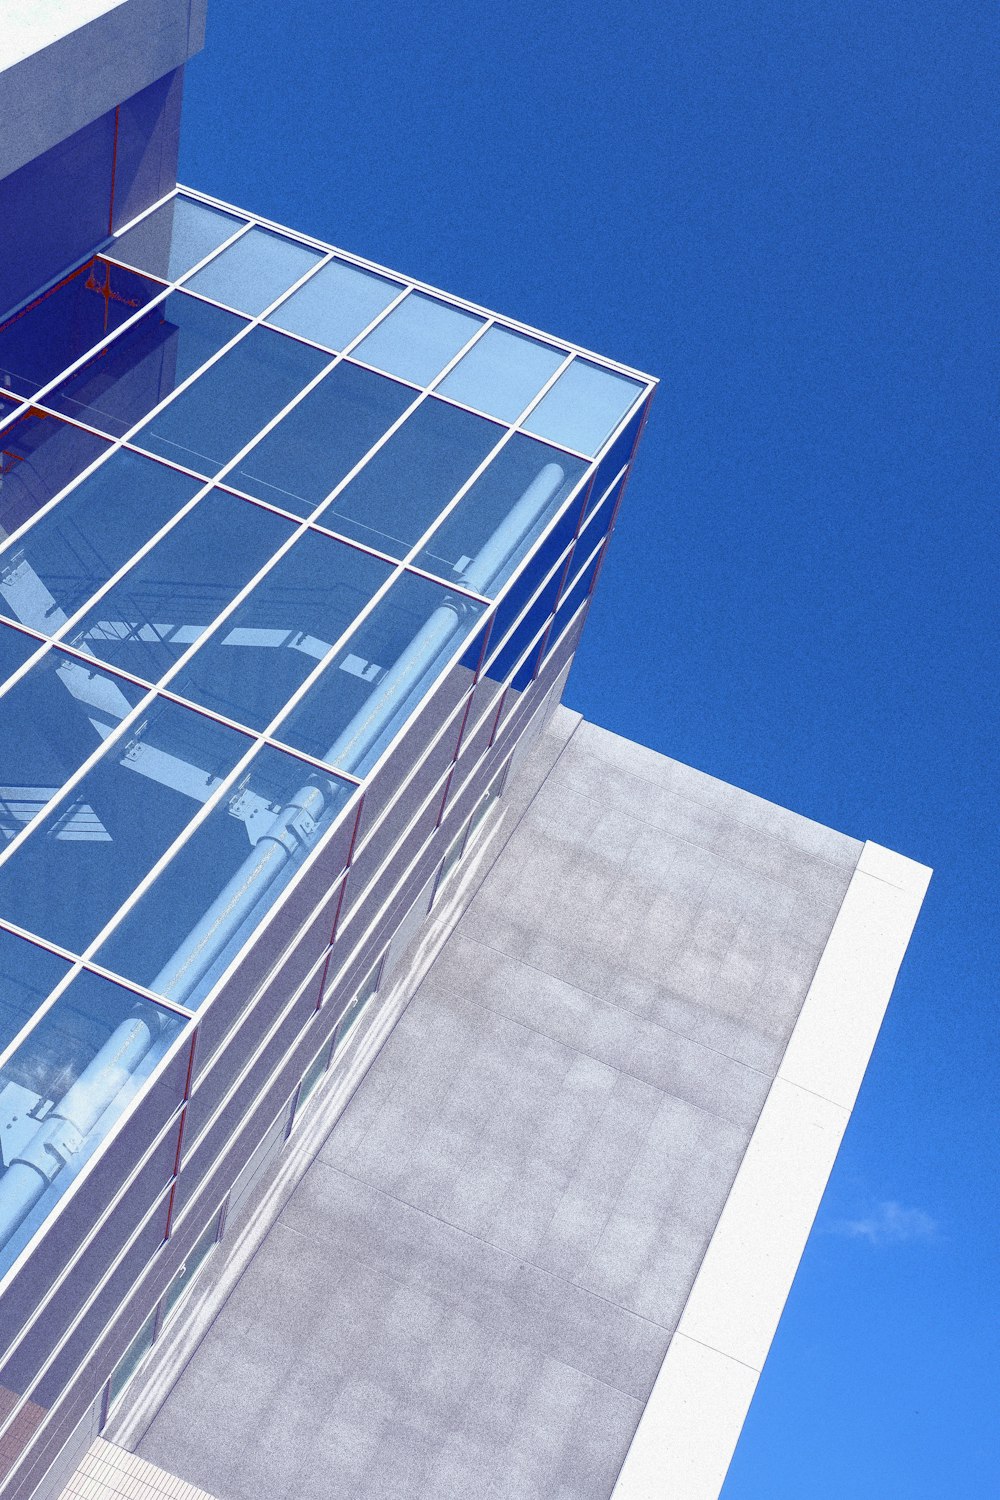 low-angle photography of white and blue glass walled high-rise building